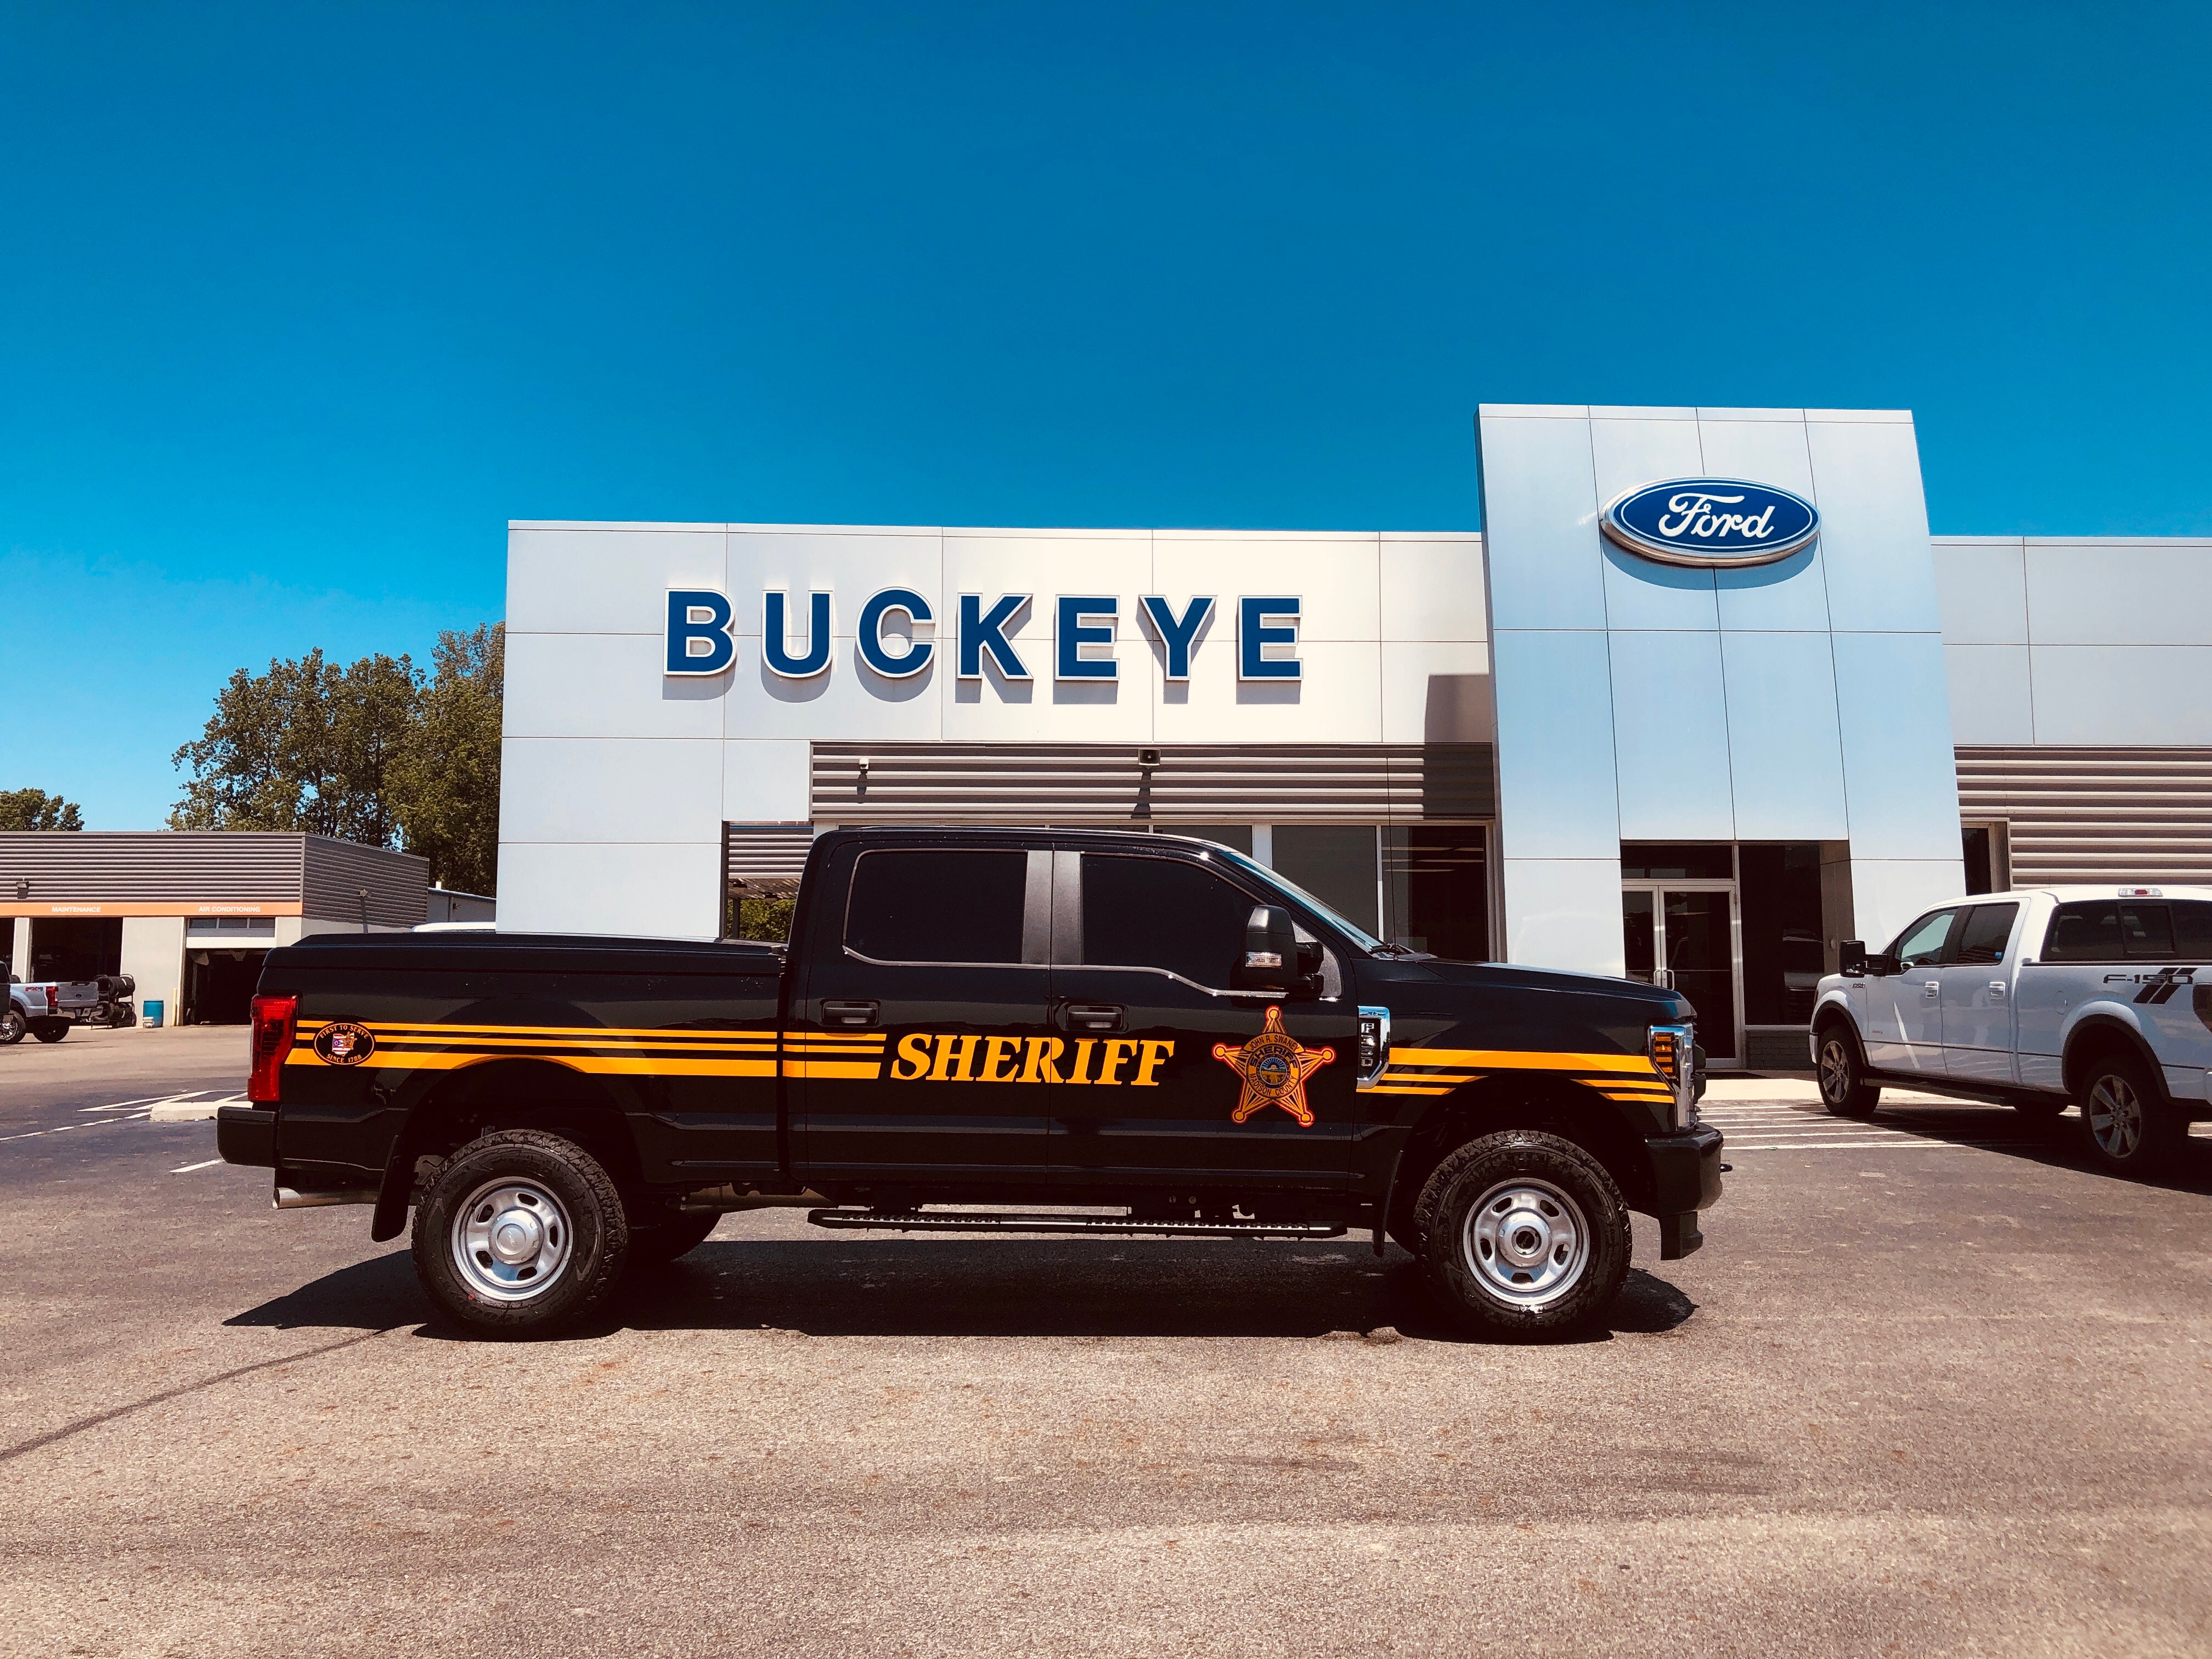 Commercial Vehicle at Buckeye Ford of London in London, OH